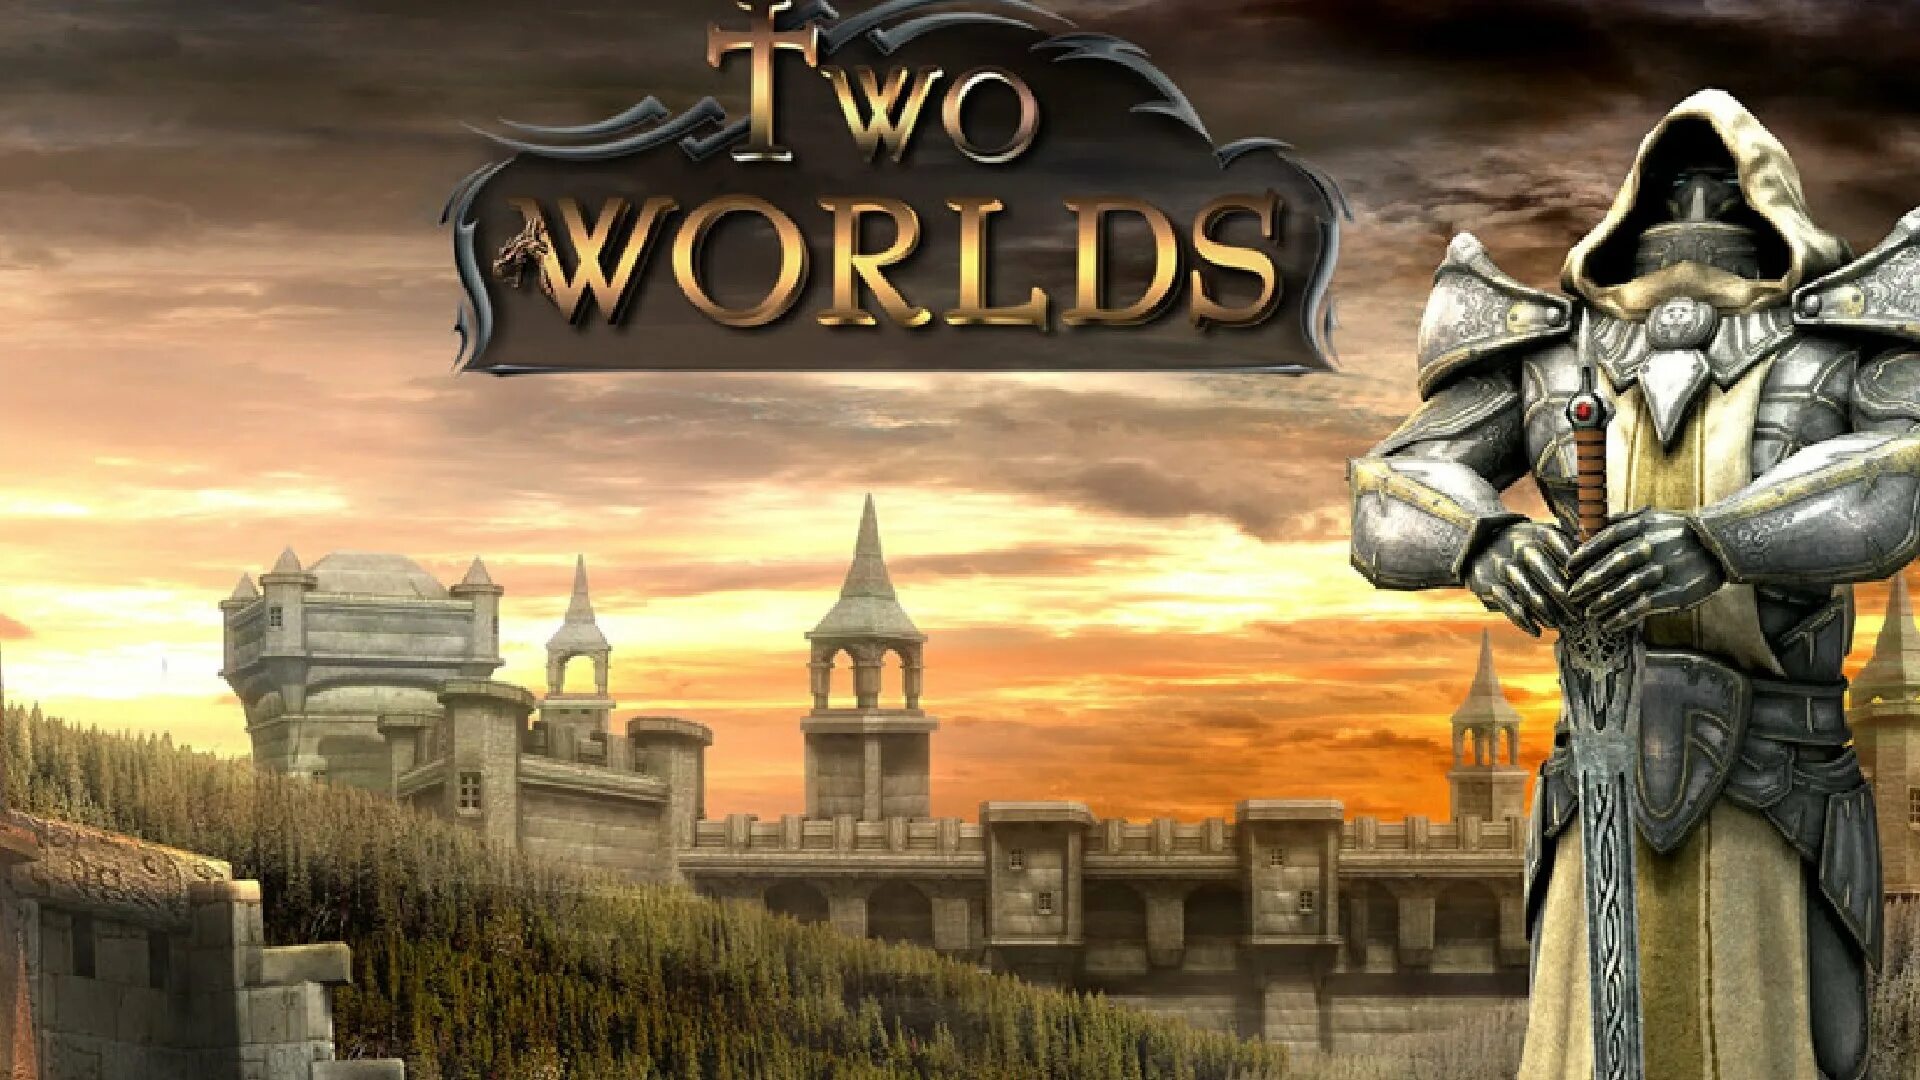 Игра two Worlds Epic Edition. Two Worlds 2 Epic Edition. Two Worlds Epic Edition обложка. Two Worlds 2 мантии магов. Two world epic